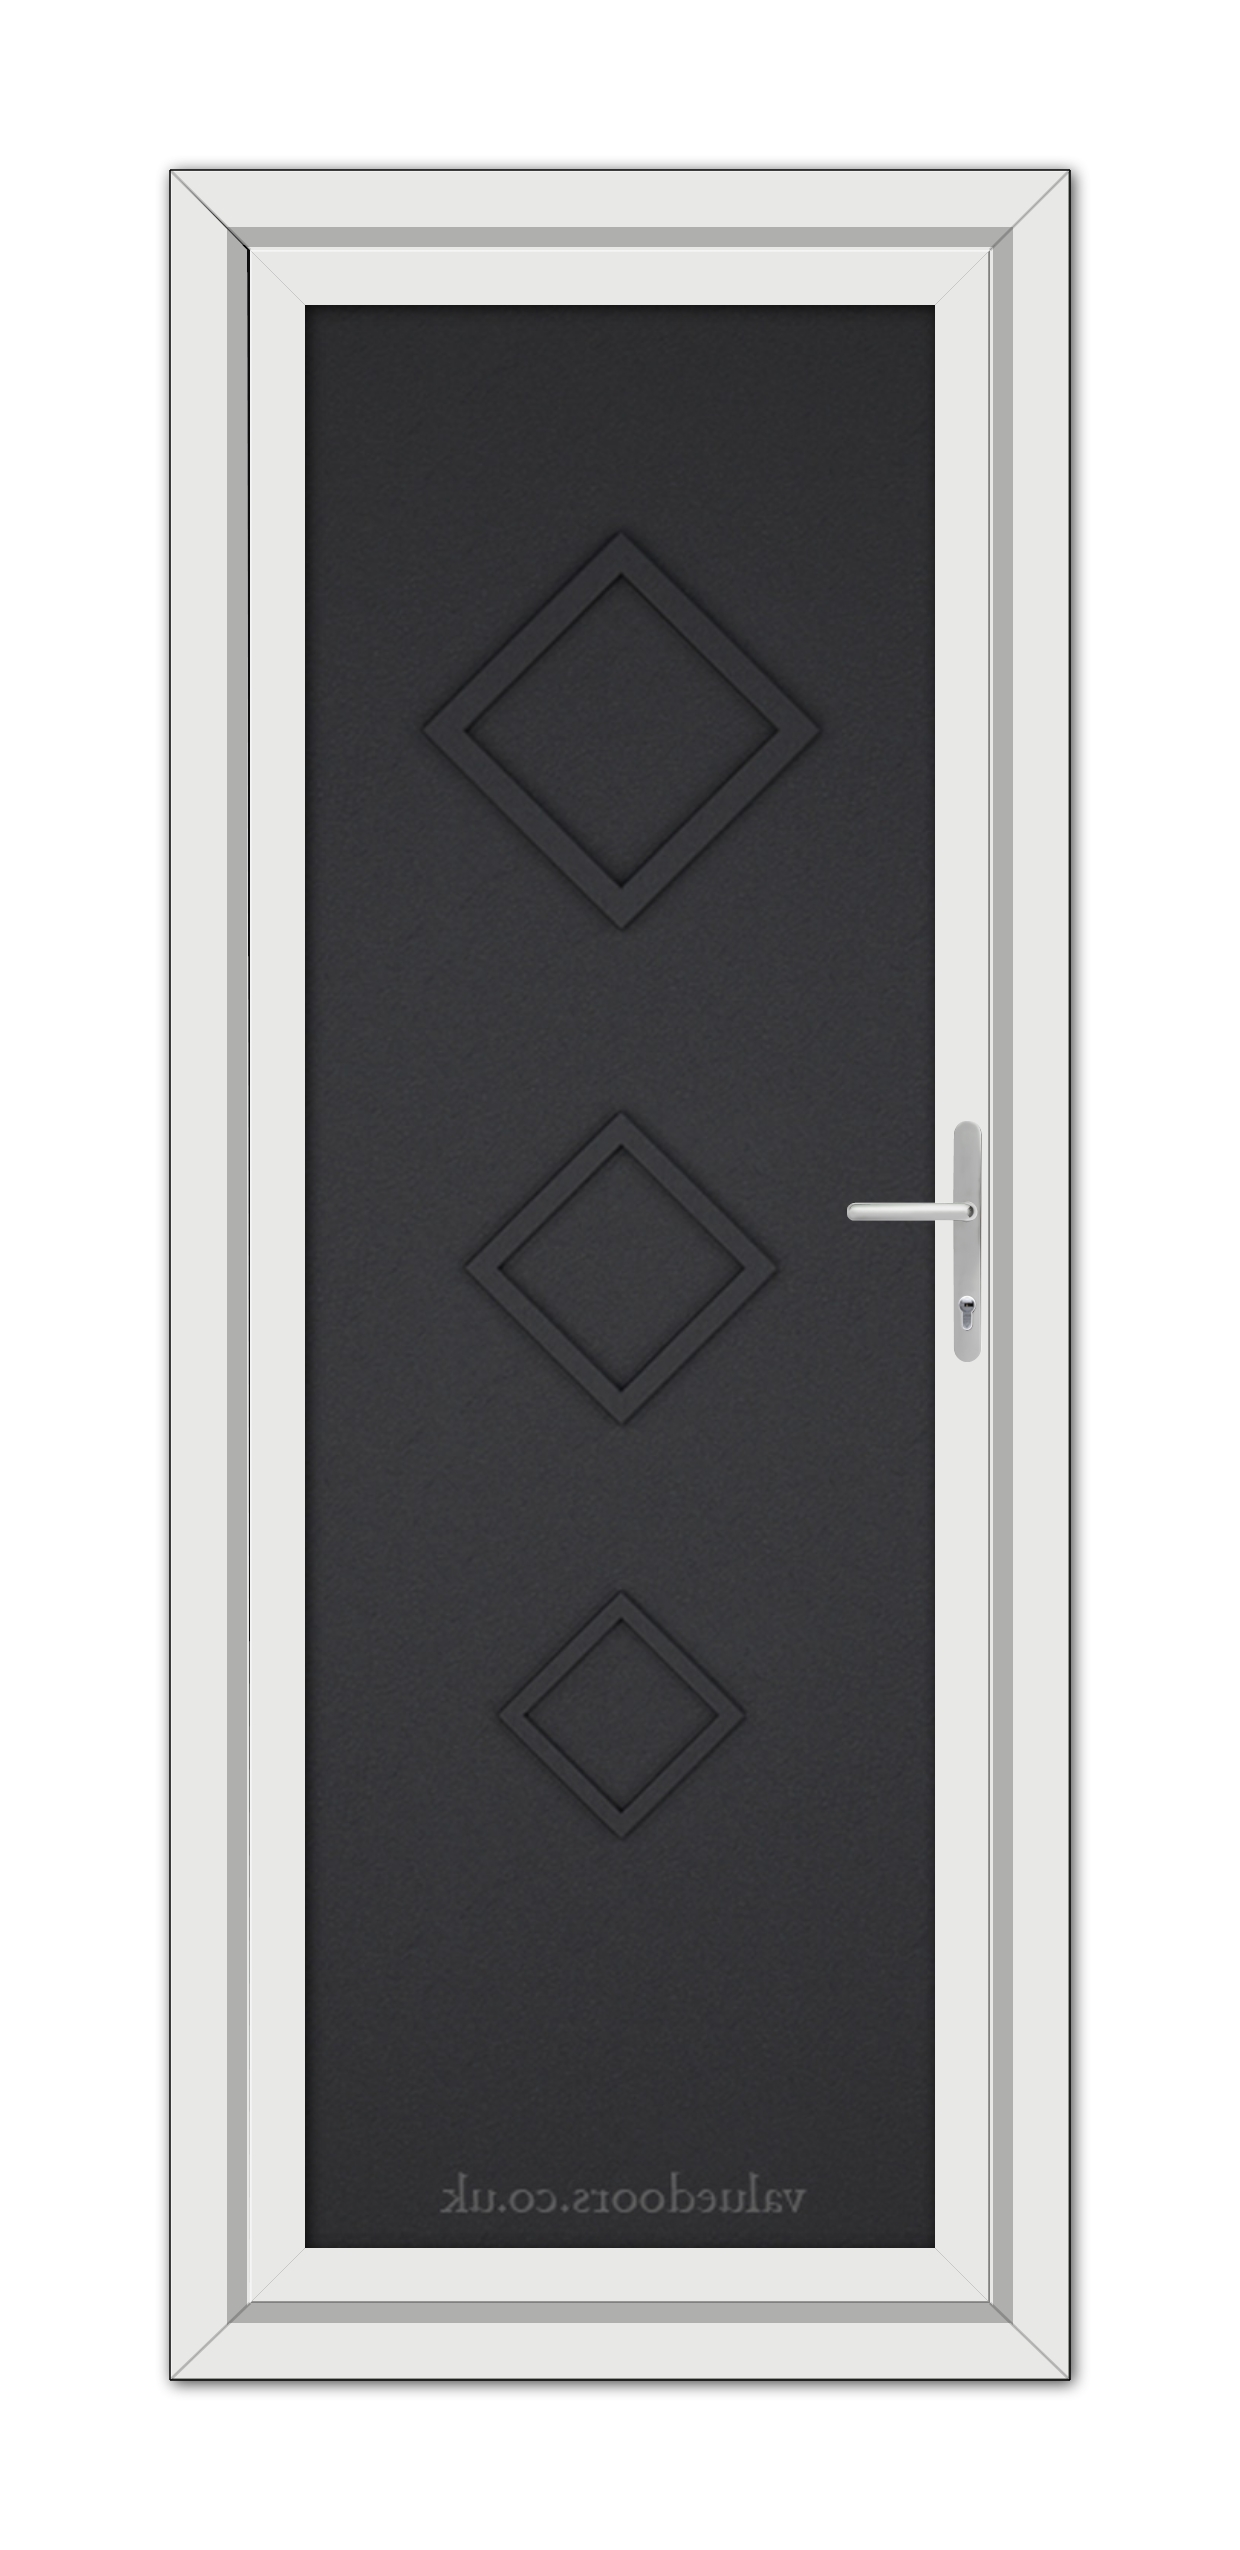 A Black Brown Modern 5123 Solid uPVC door with three diagonal panels and a metallic handle, set within a white frame.